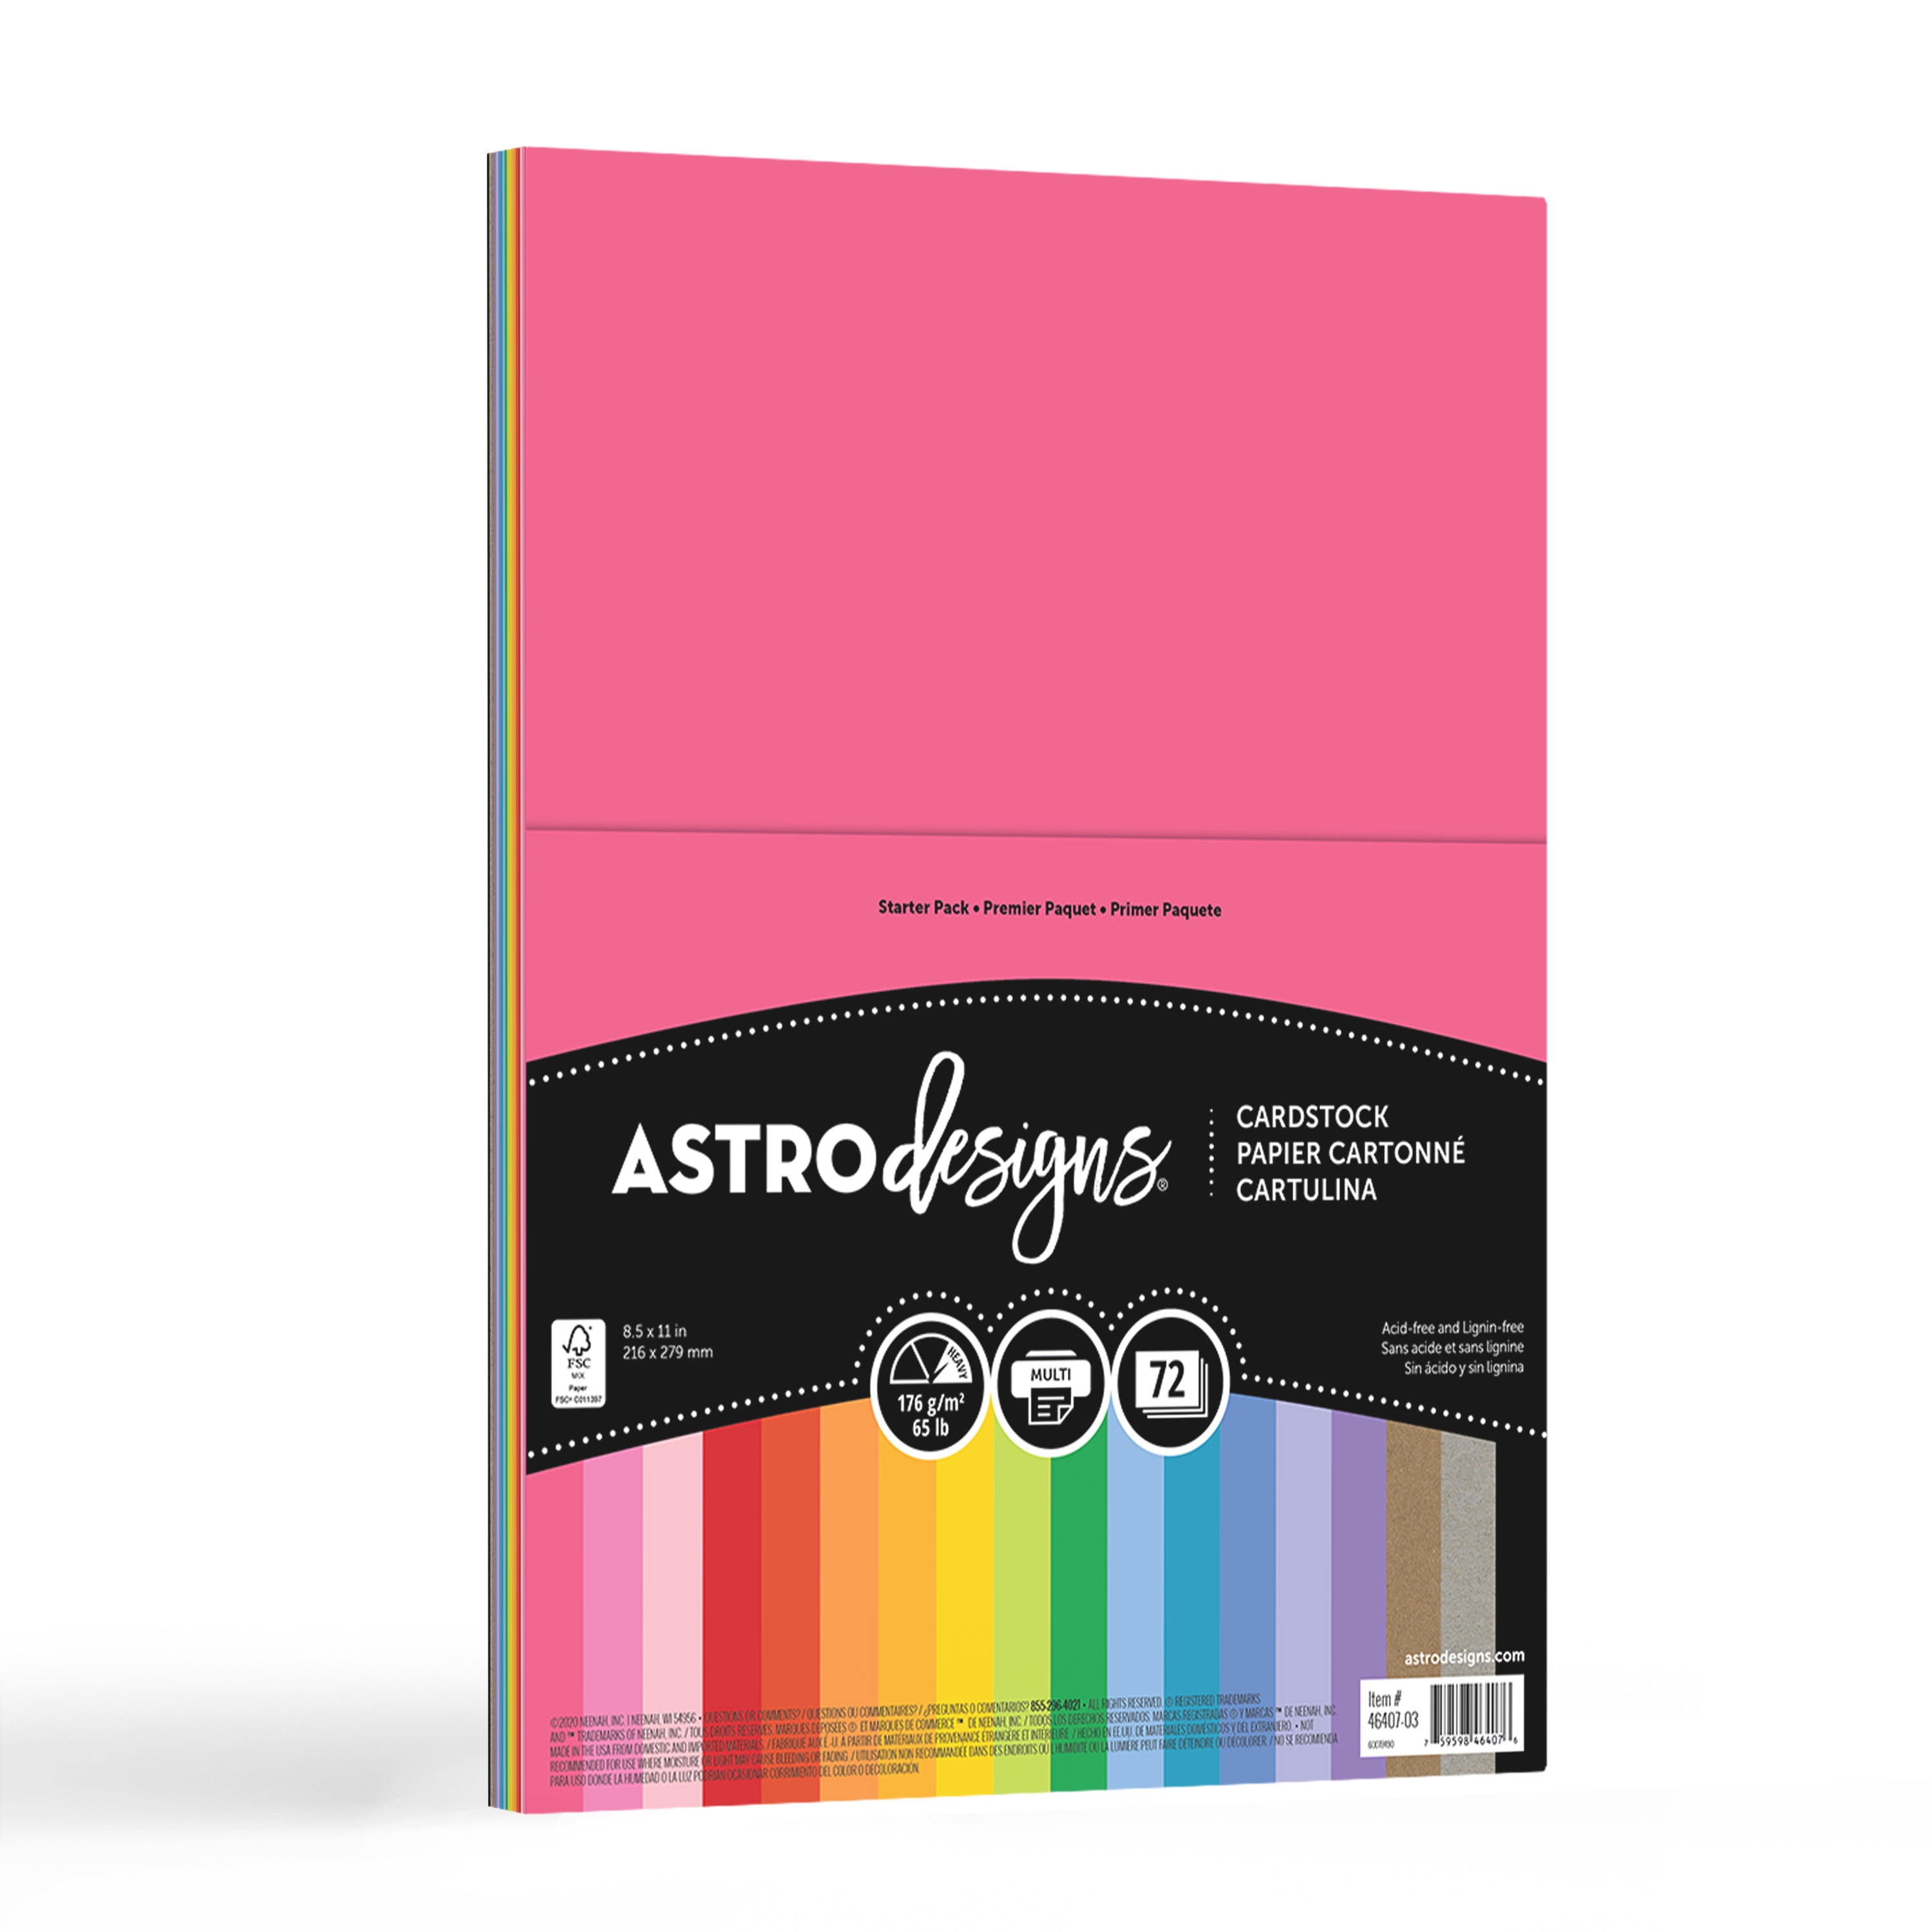 Astrobright Perforated 11 x 17 65 Bright Cardstock 250 Sheets/Pkg